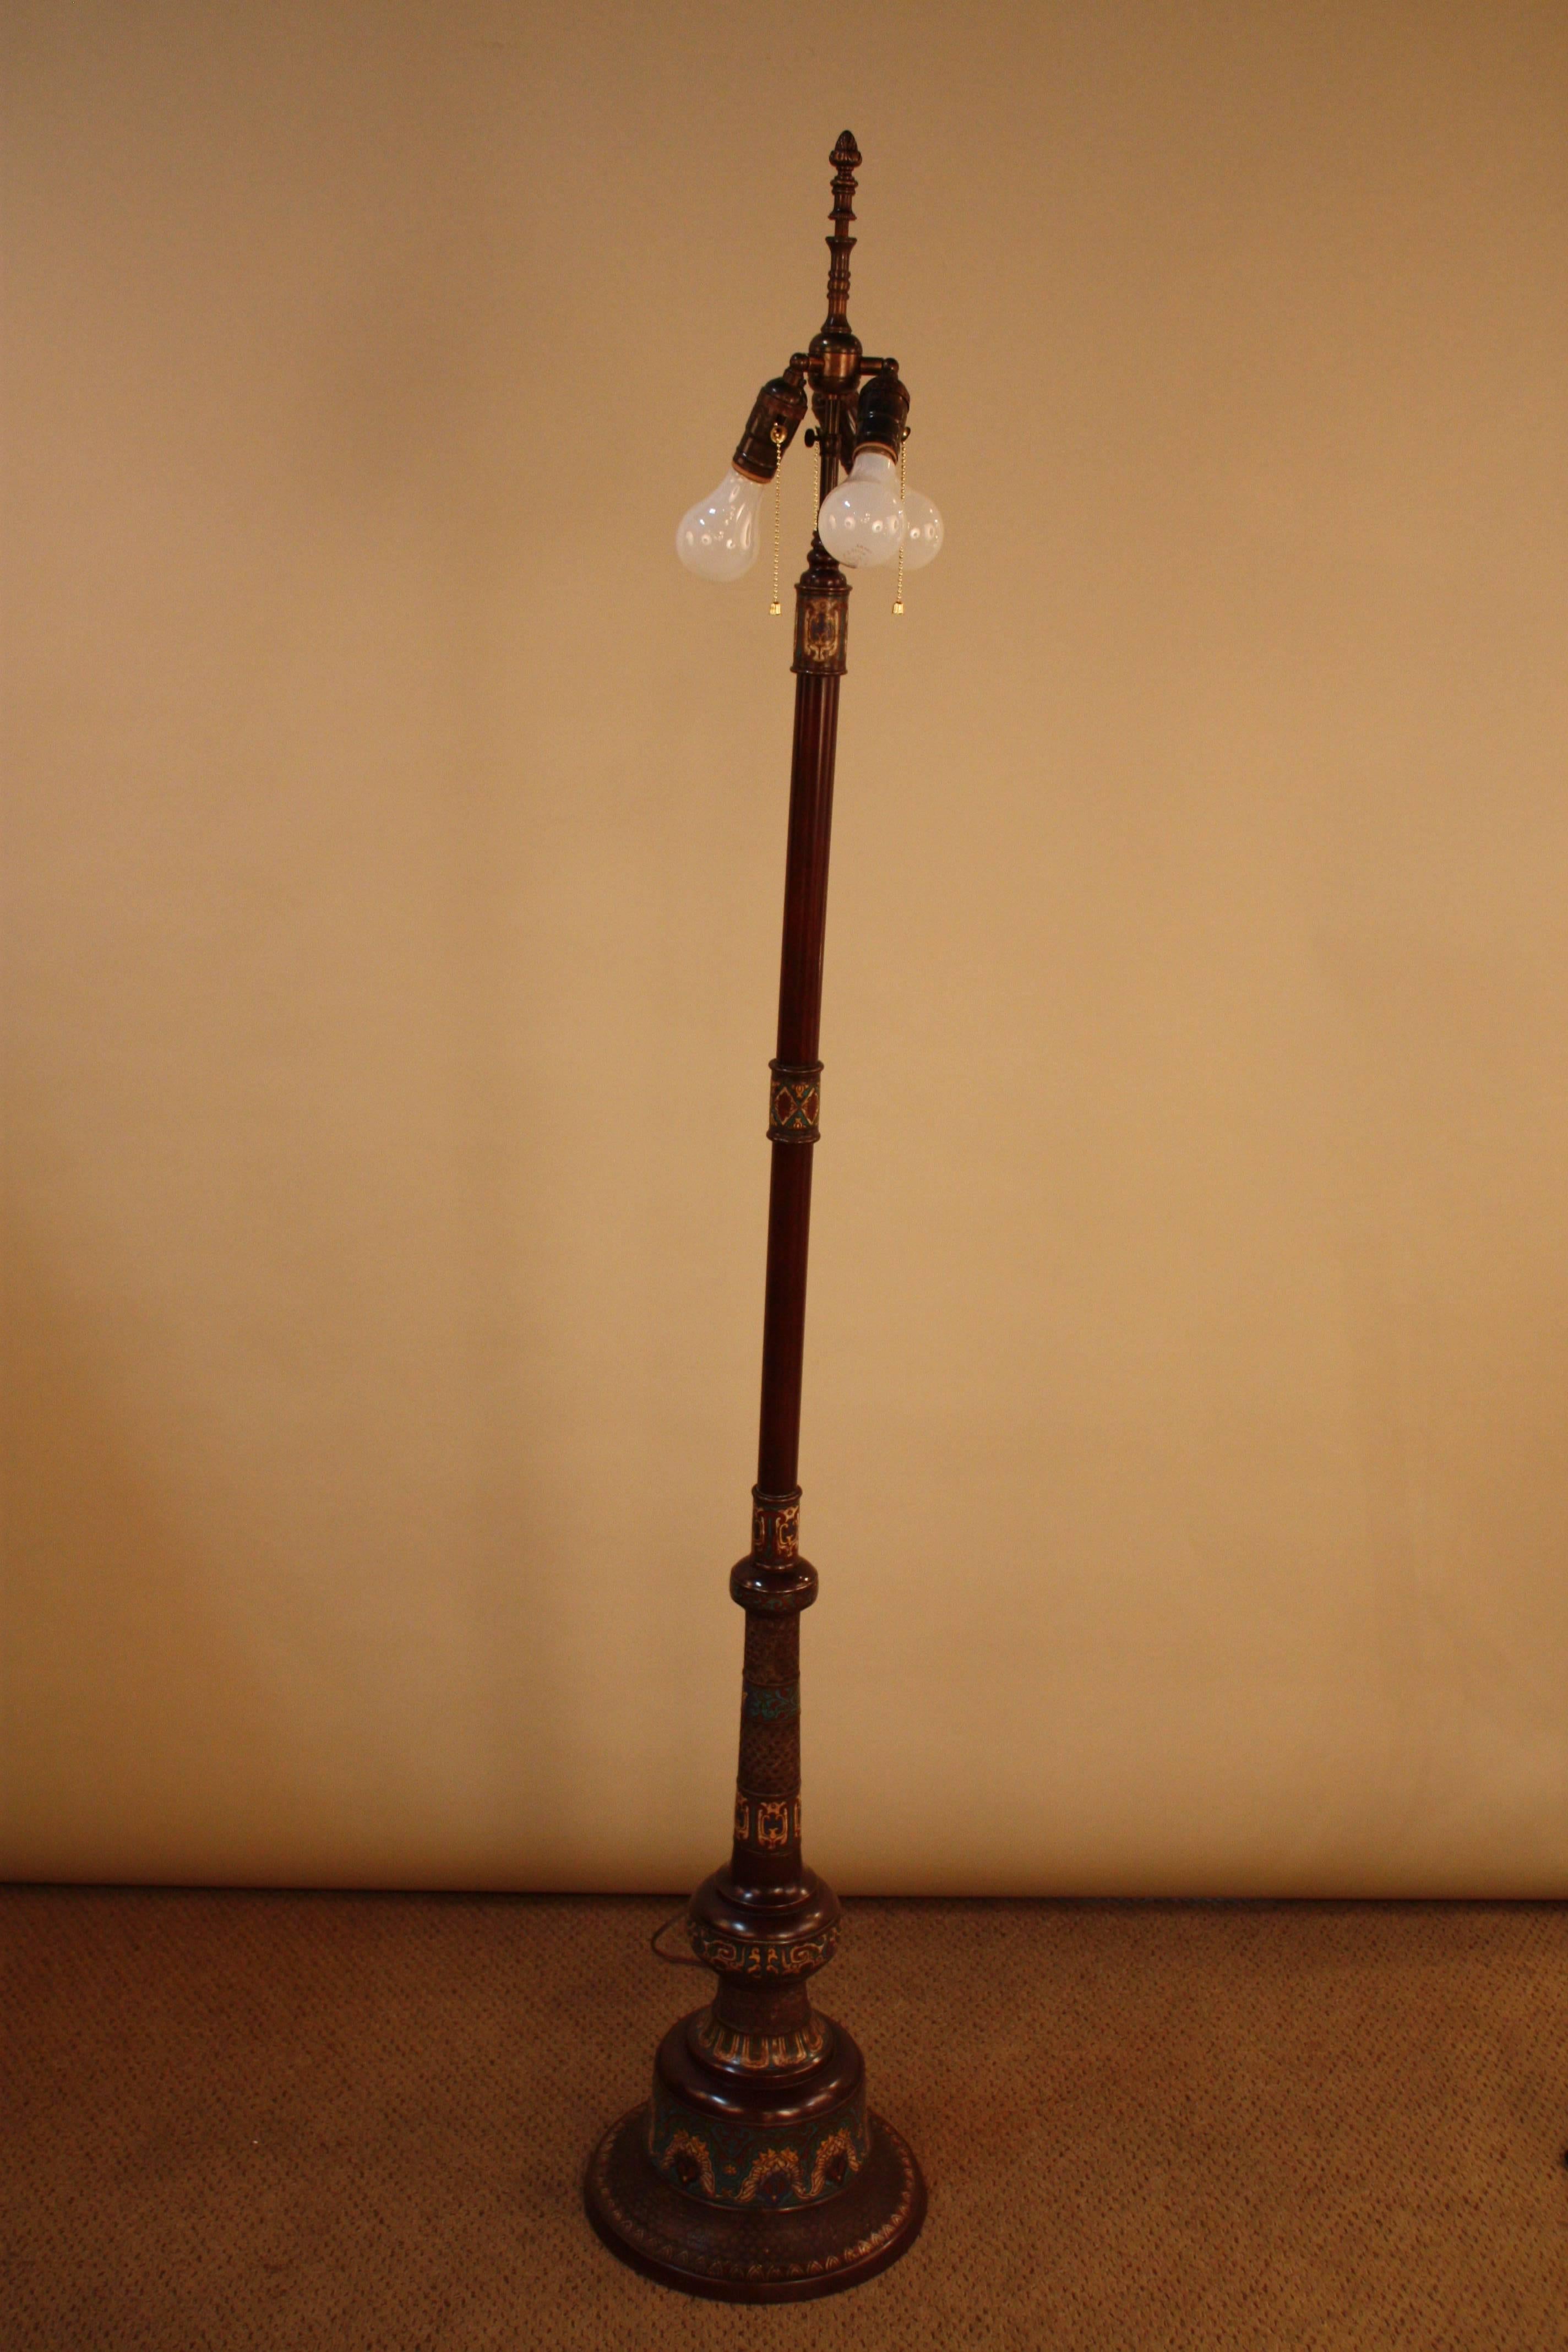 Bronze and exquisite detailing enamel work base, early 20th Japanese floor lamp fitted with handmade box pleased silk lampshade.
Three light 100 watt max each.